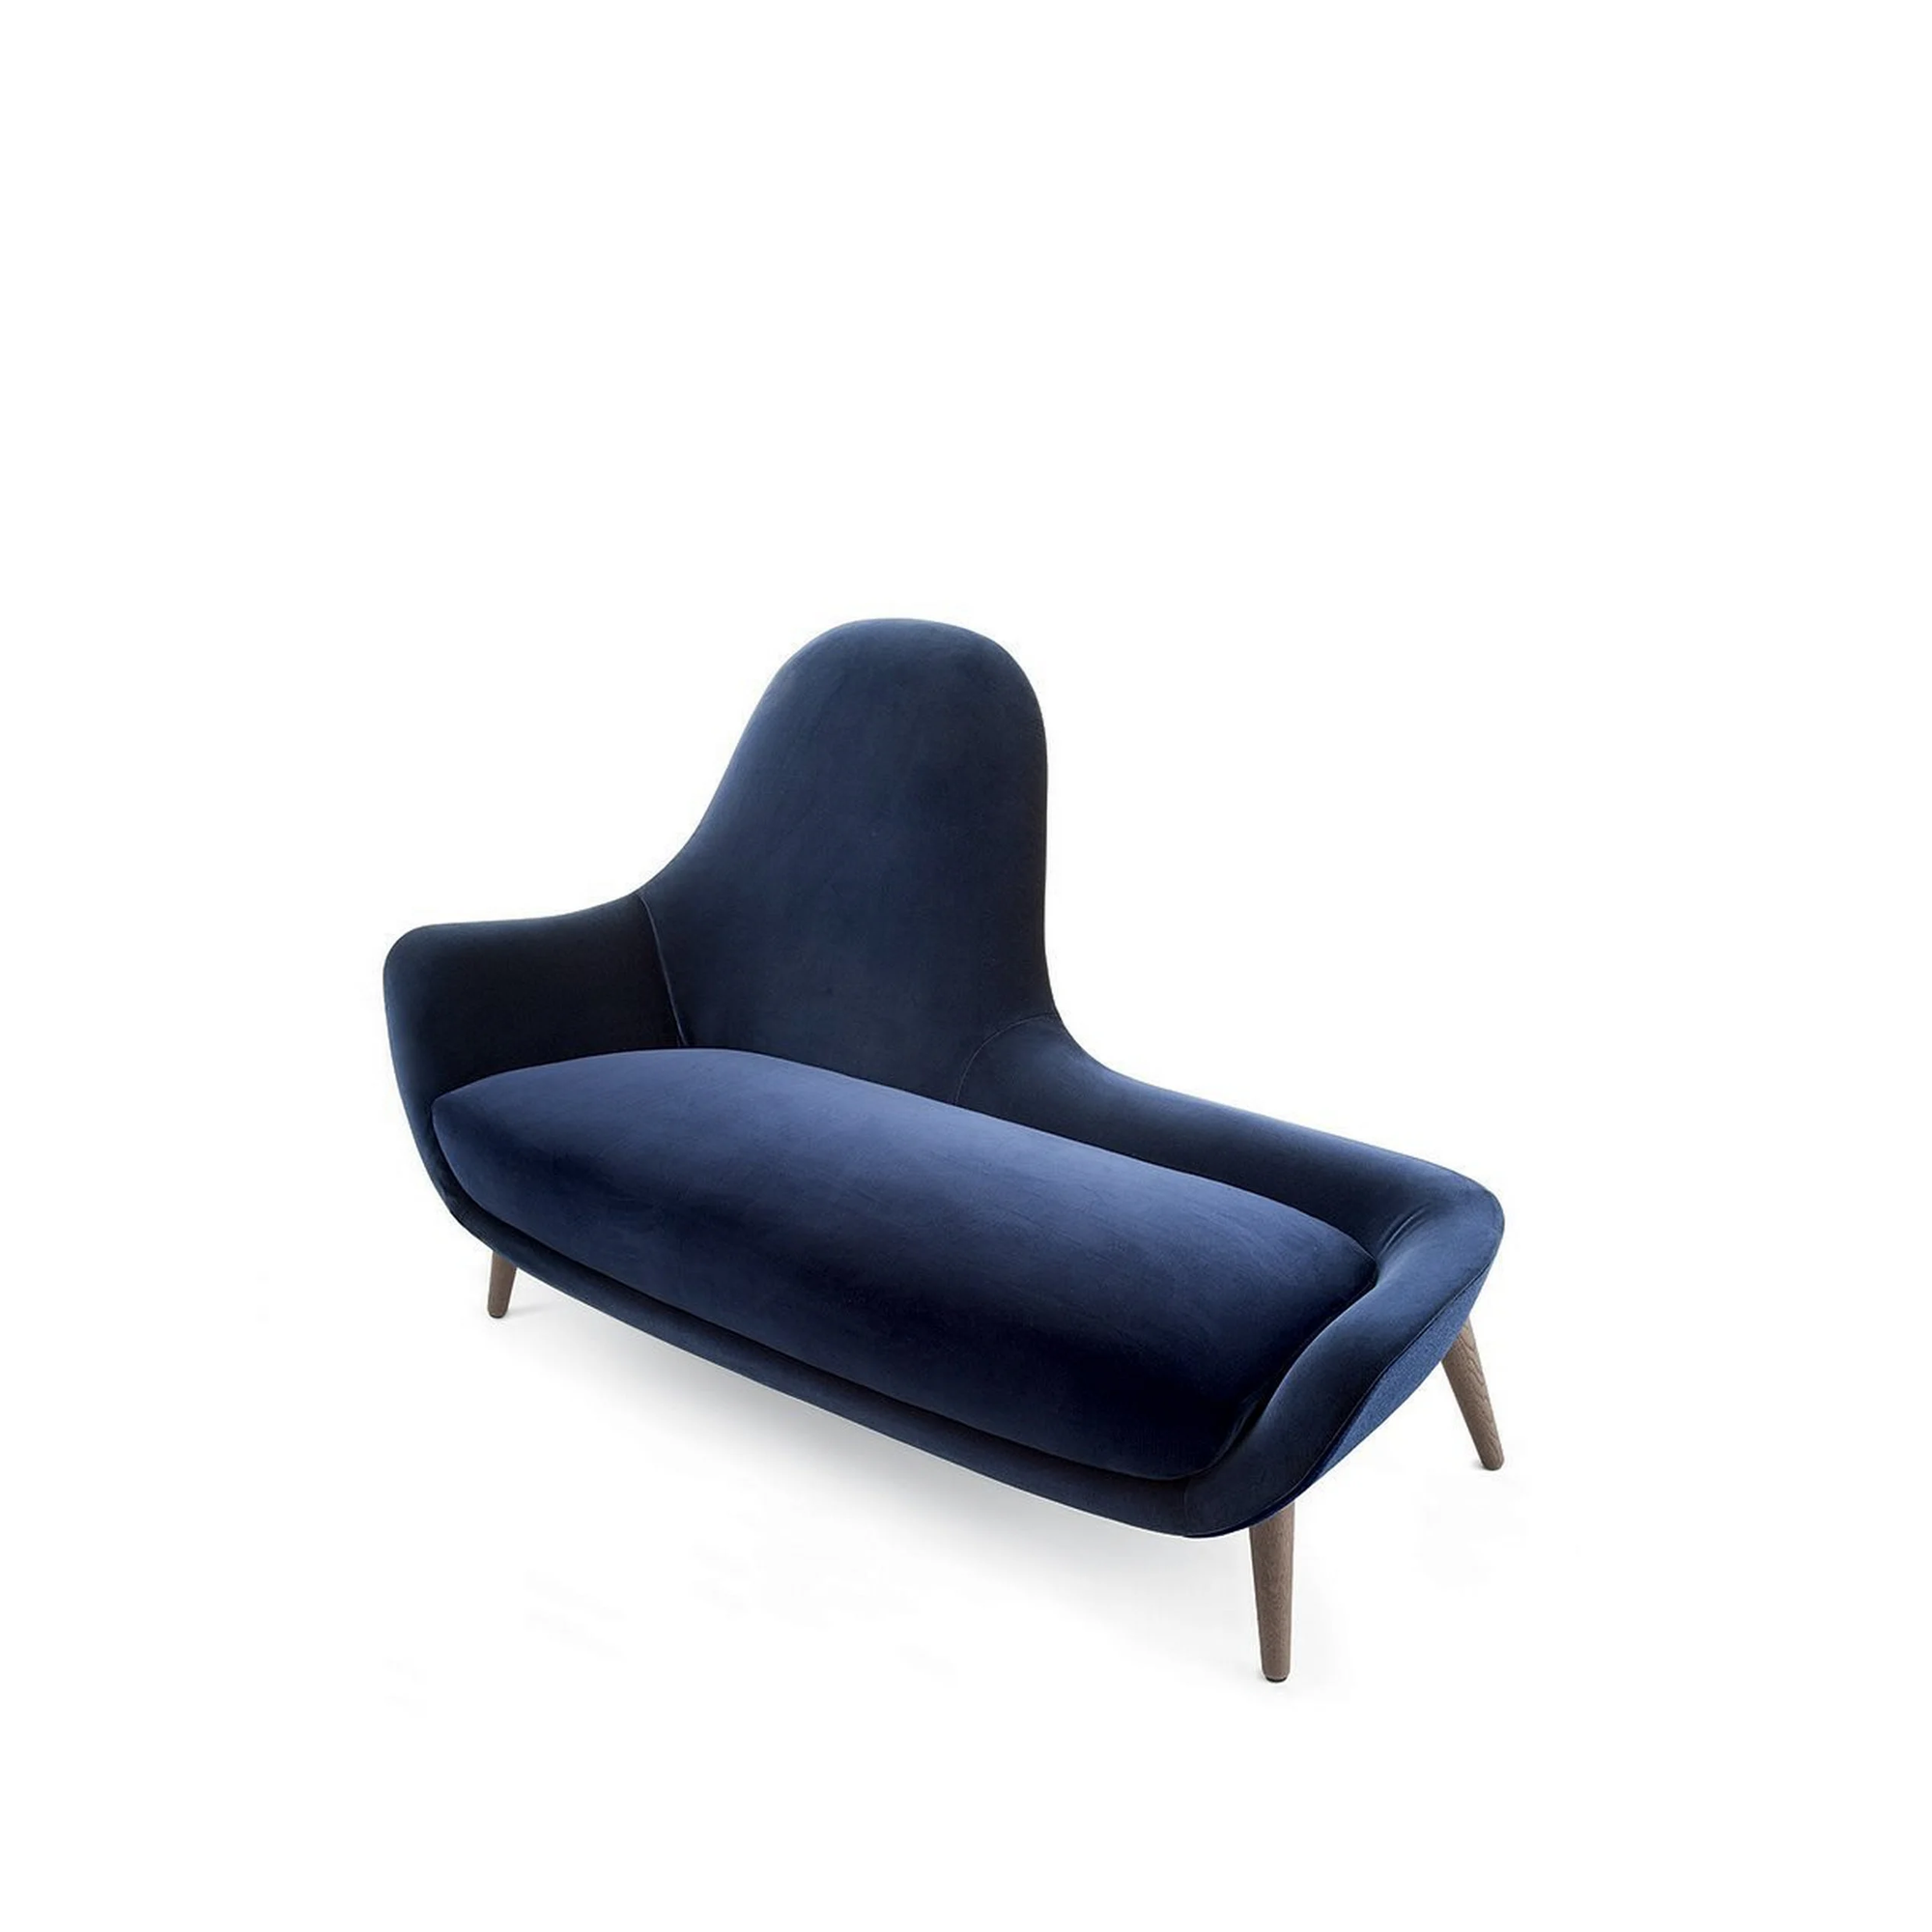 Mad Chaise Longue